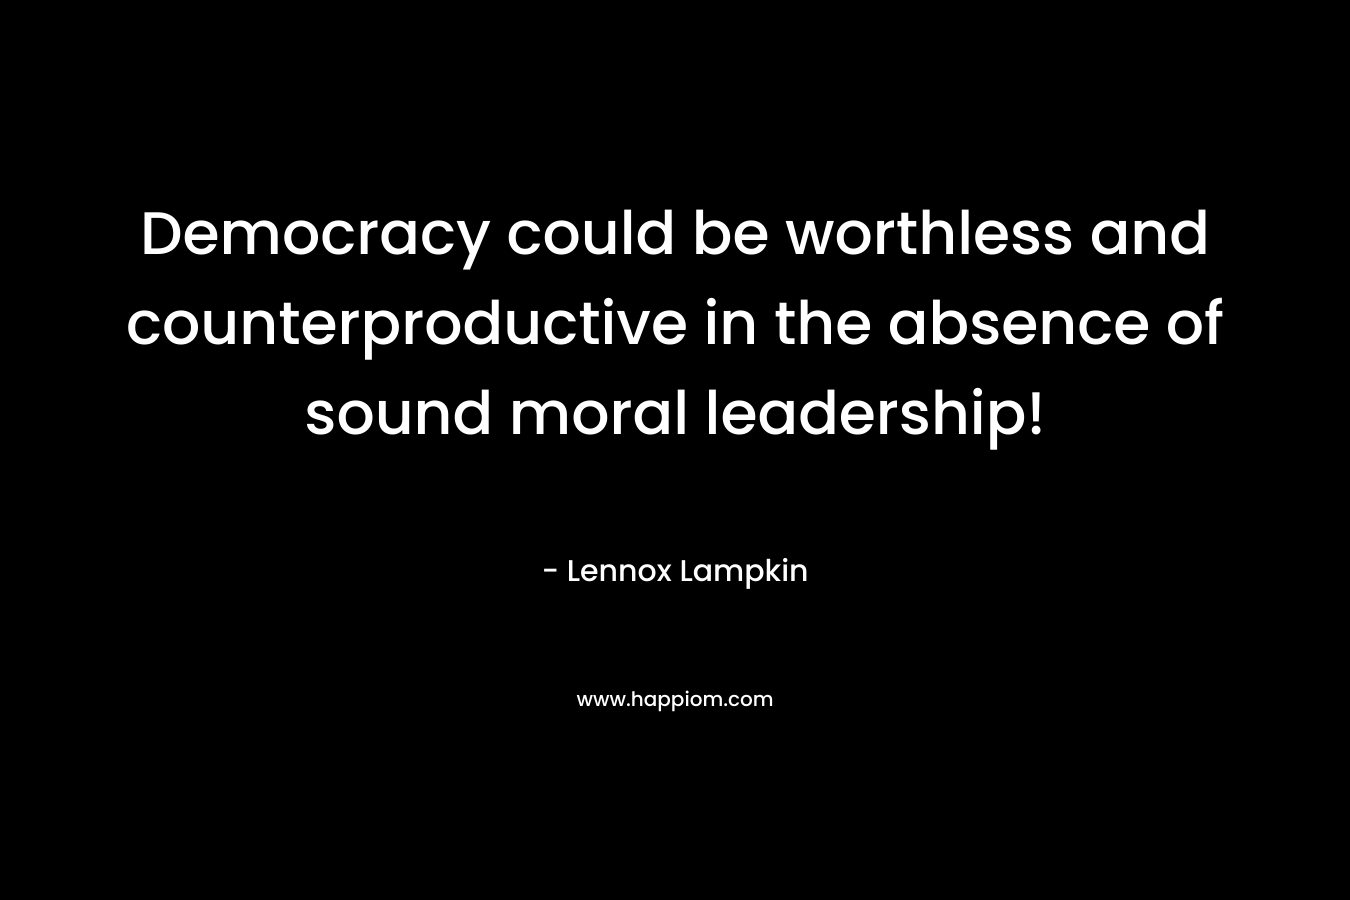 Democracy could be worthless and counterproductive in the absence of sound moral leadership! – Lennox Lampkin